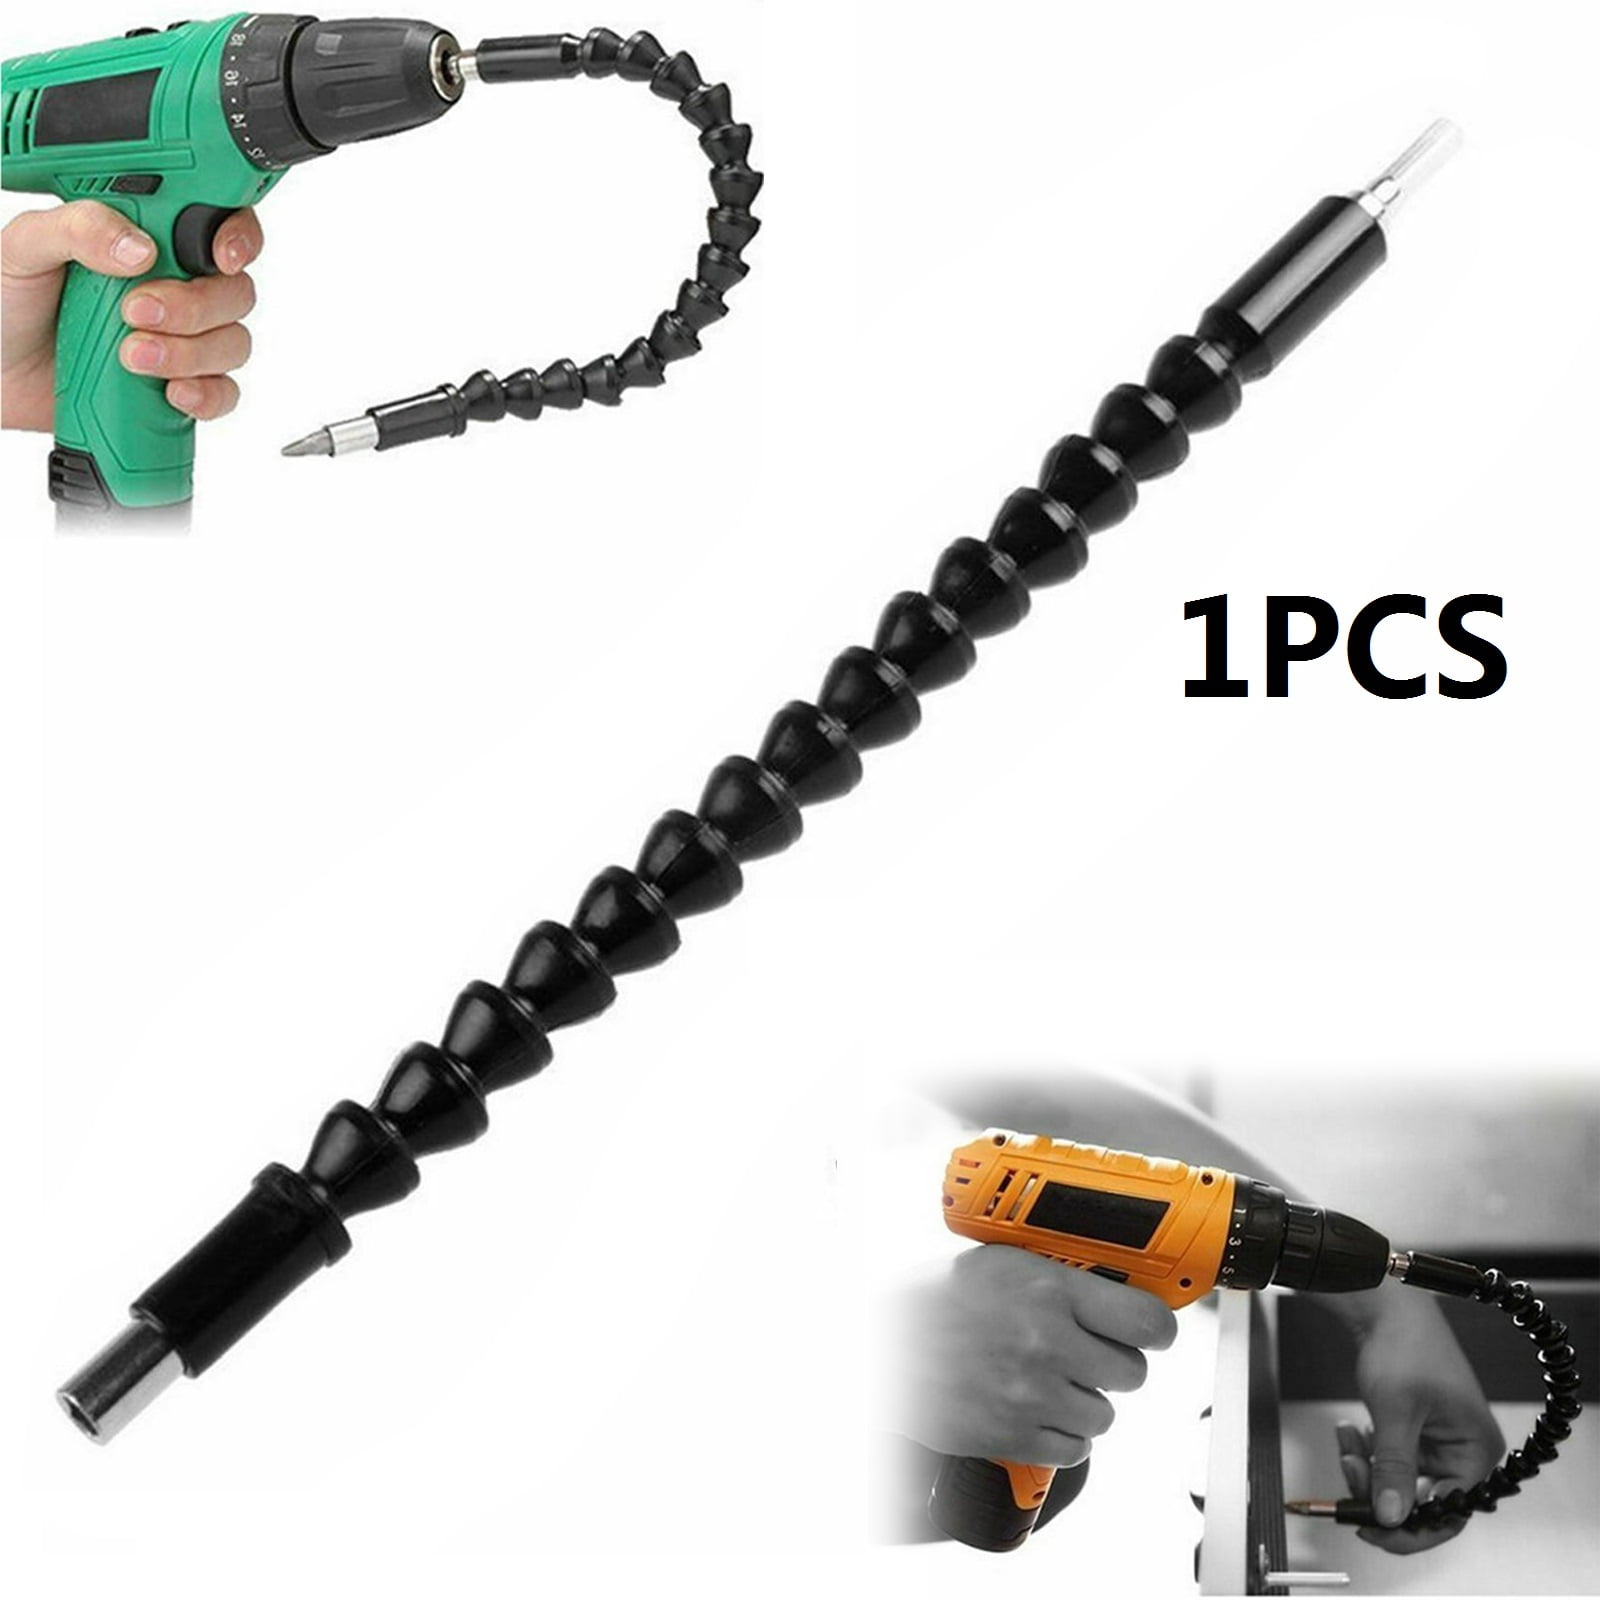 Extensions Screwdriver Drill Bit Flexible Shaft Holder Connecting Link Tool RS 